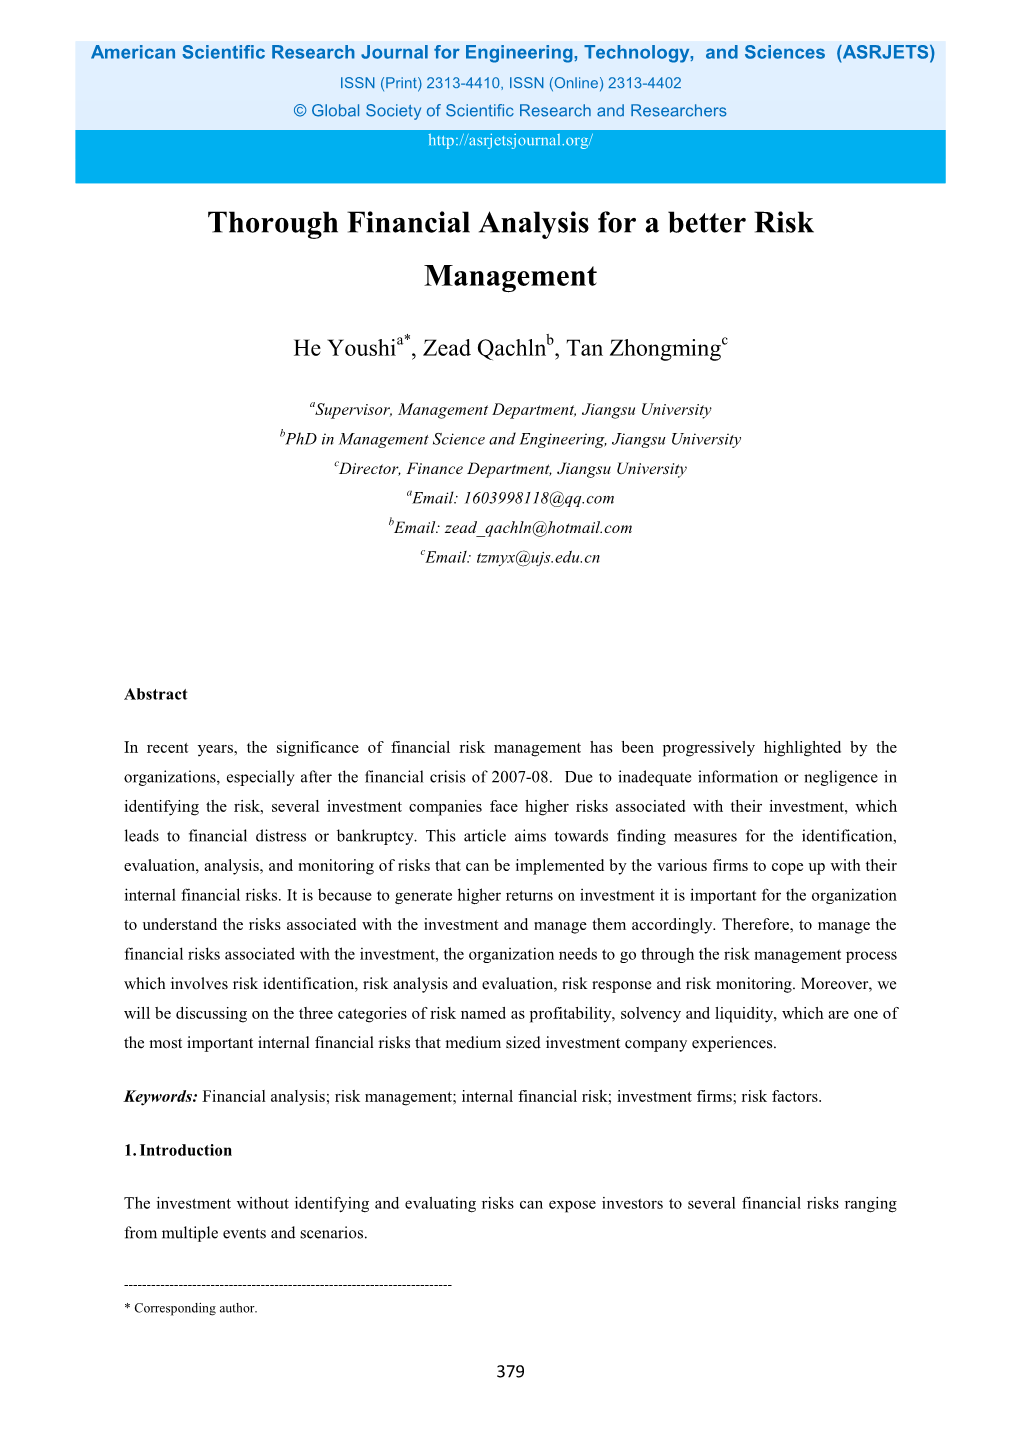 Thorough Financial Analysis for a Better Risk Management